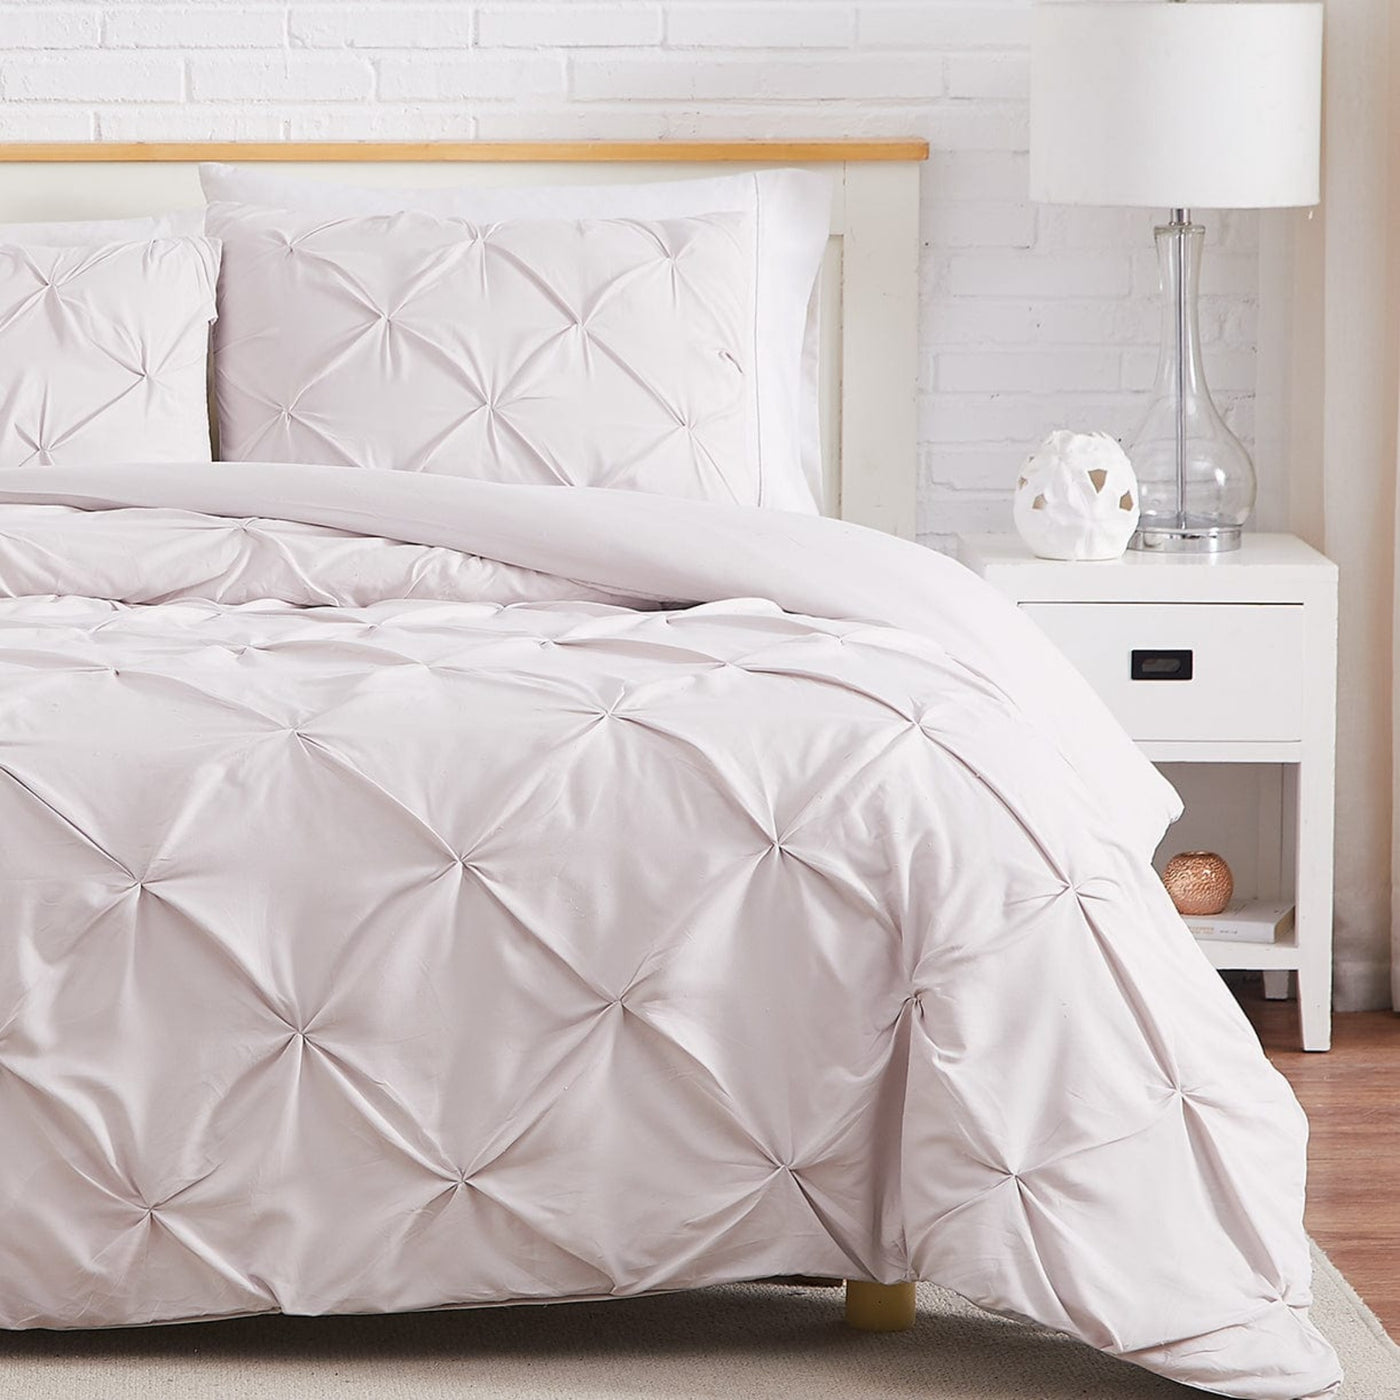 Half Front View of Pintuck Pinch Pleated Duvet Cover Set in Bone#color_vilano-bone